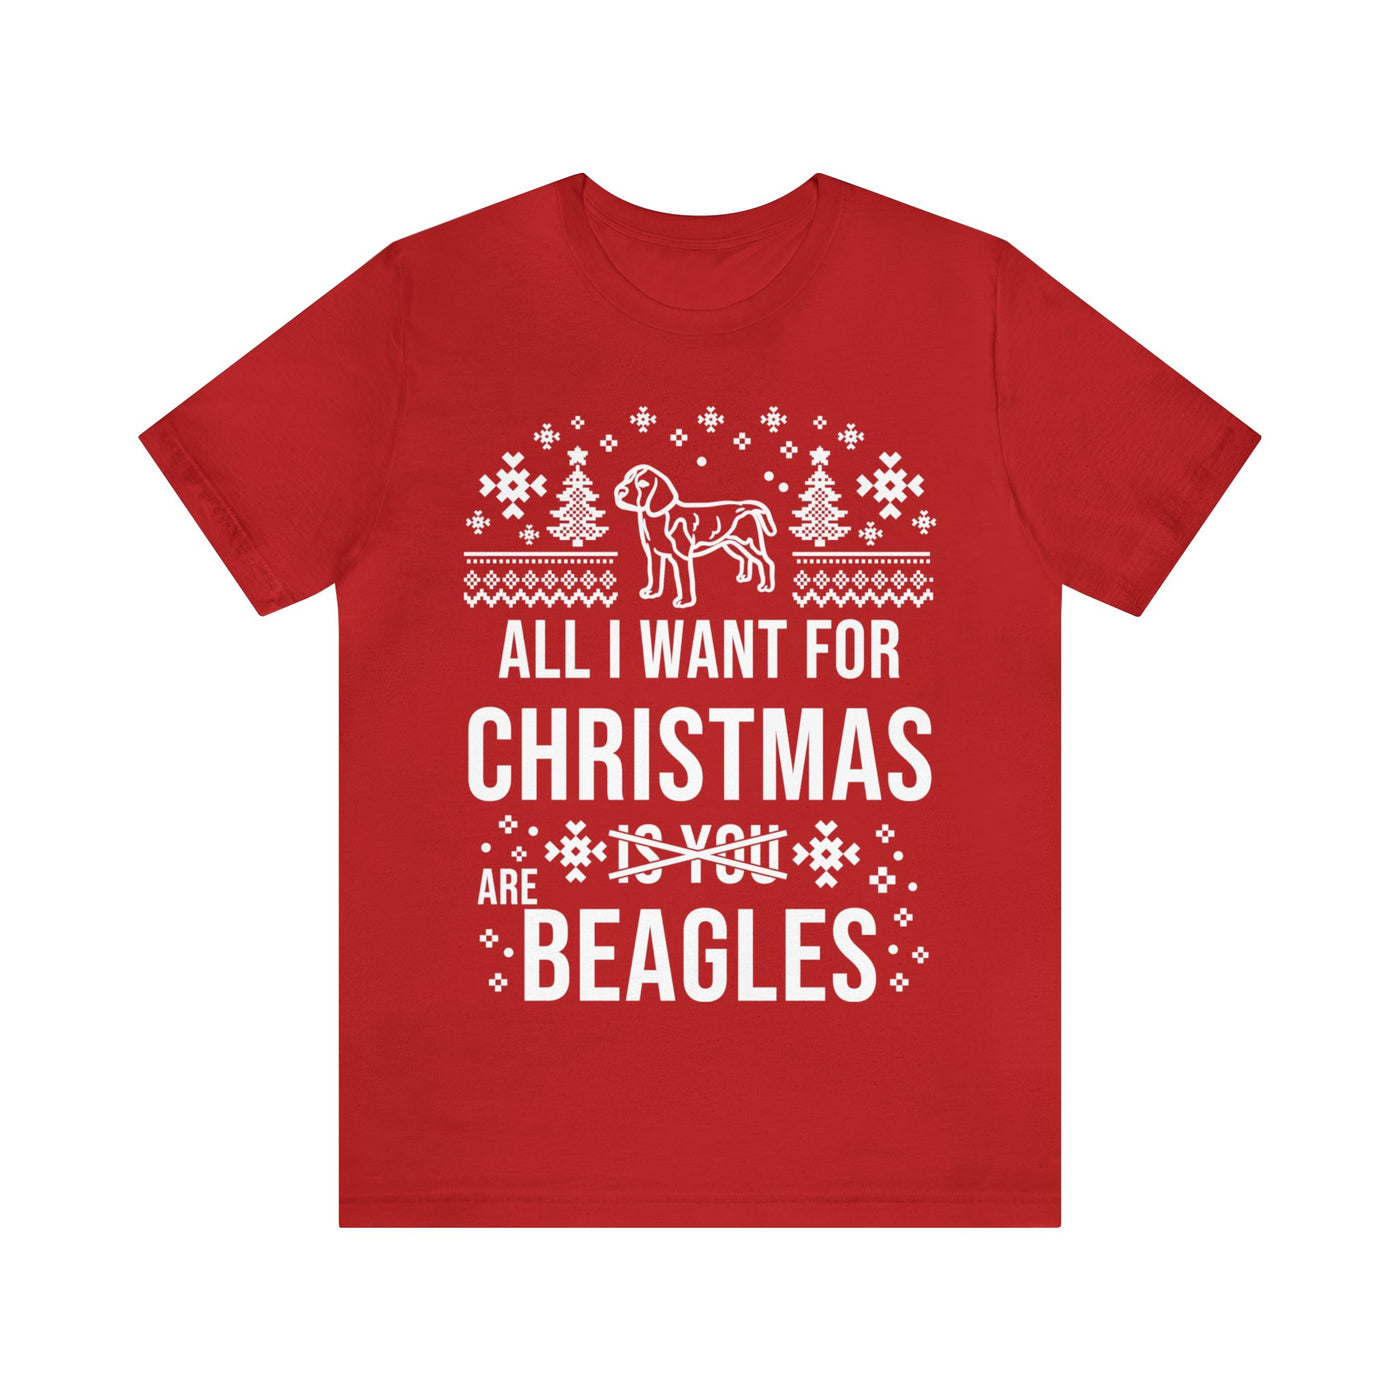 All I Want For Christmas (Is You) Are Beagles White Print T-Shirt